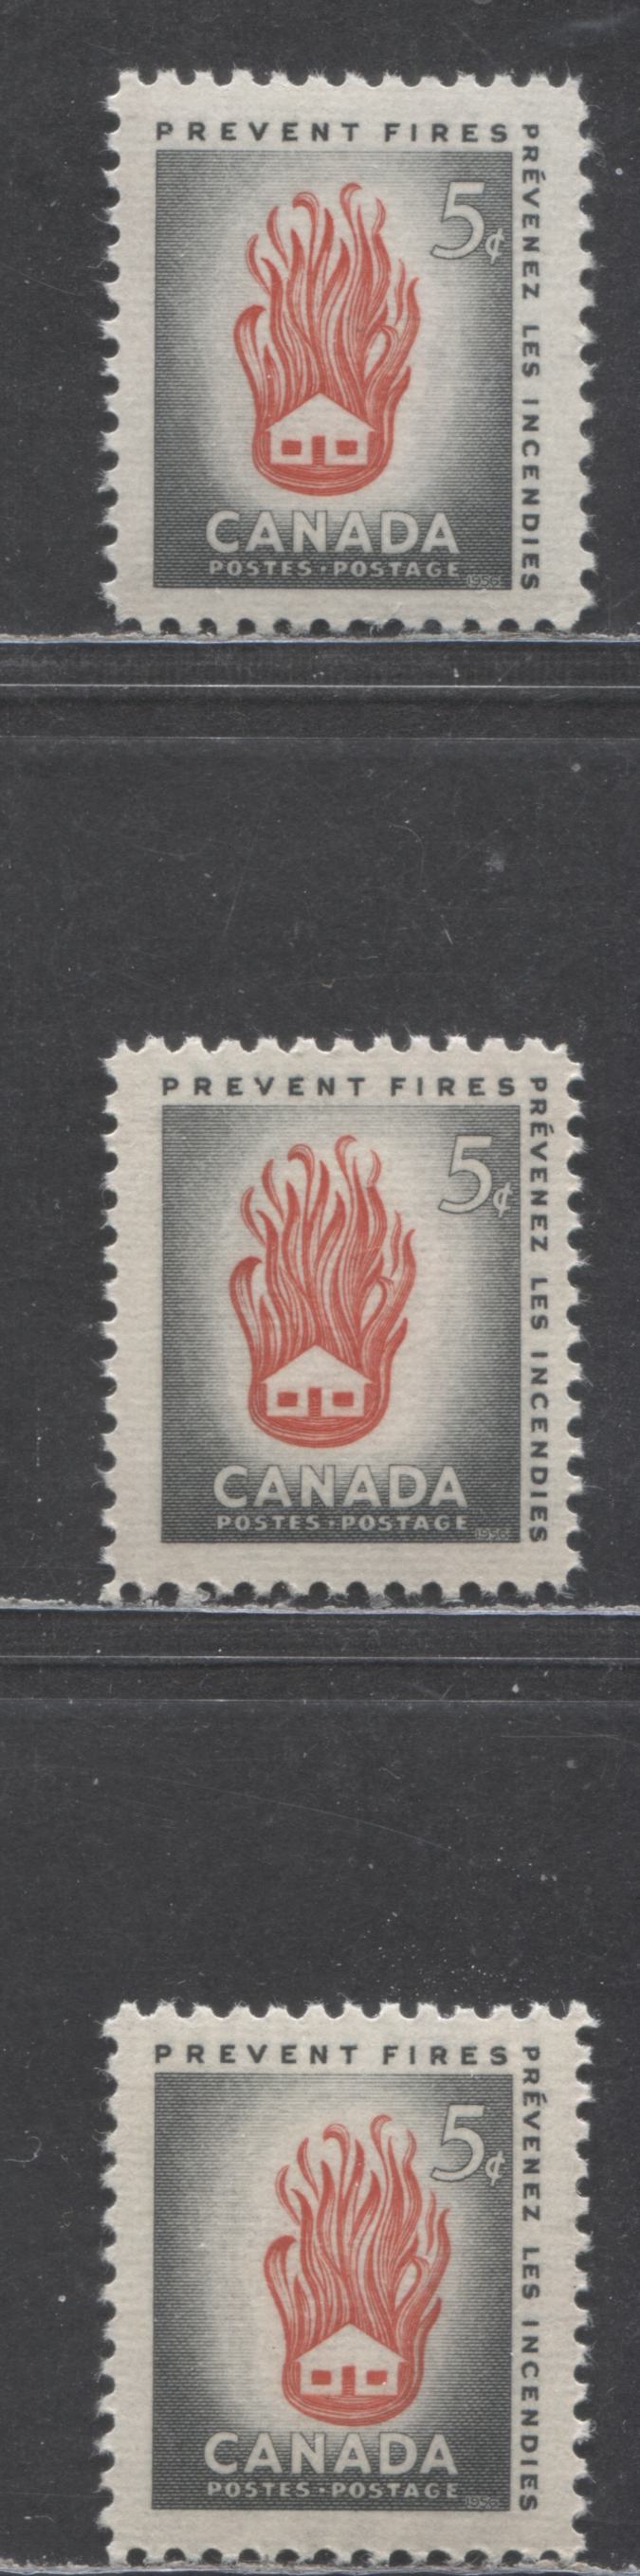 Canada #364 5c Olive Grey & Vermilion House On Fire, 1956 Fire Prevention Issue, 3 VFNH Singles, Horizontally Ribbed Paper, Cream Semi-Gloss Gum With Shifted Vignettes